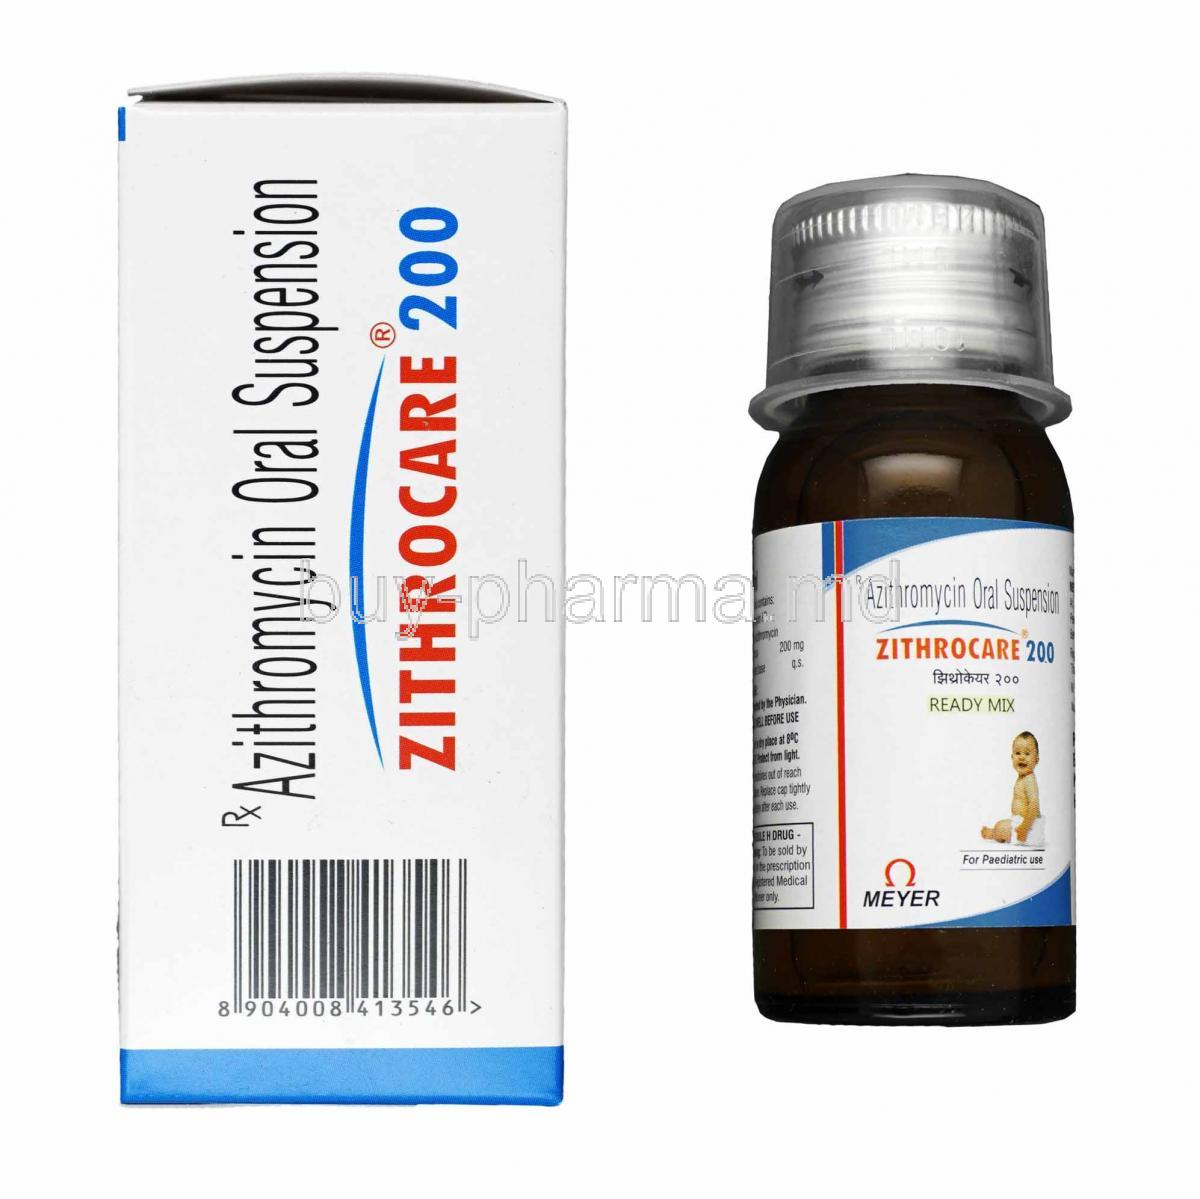 Zithrocare Oral Suspension Azithromycin 200mg box and bottle